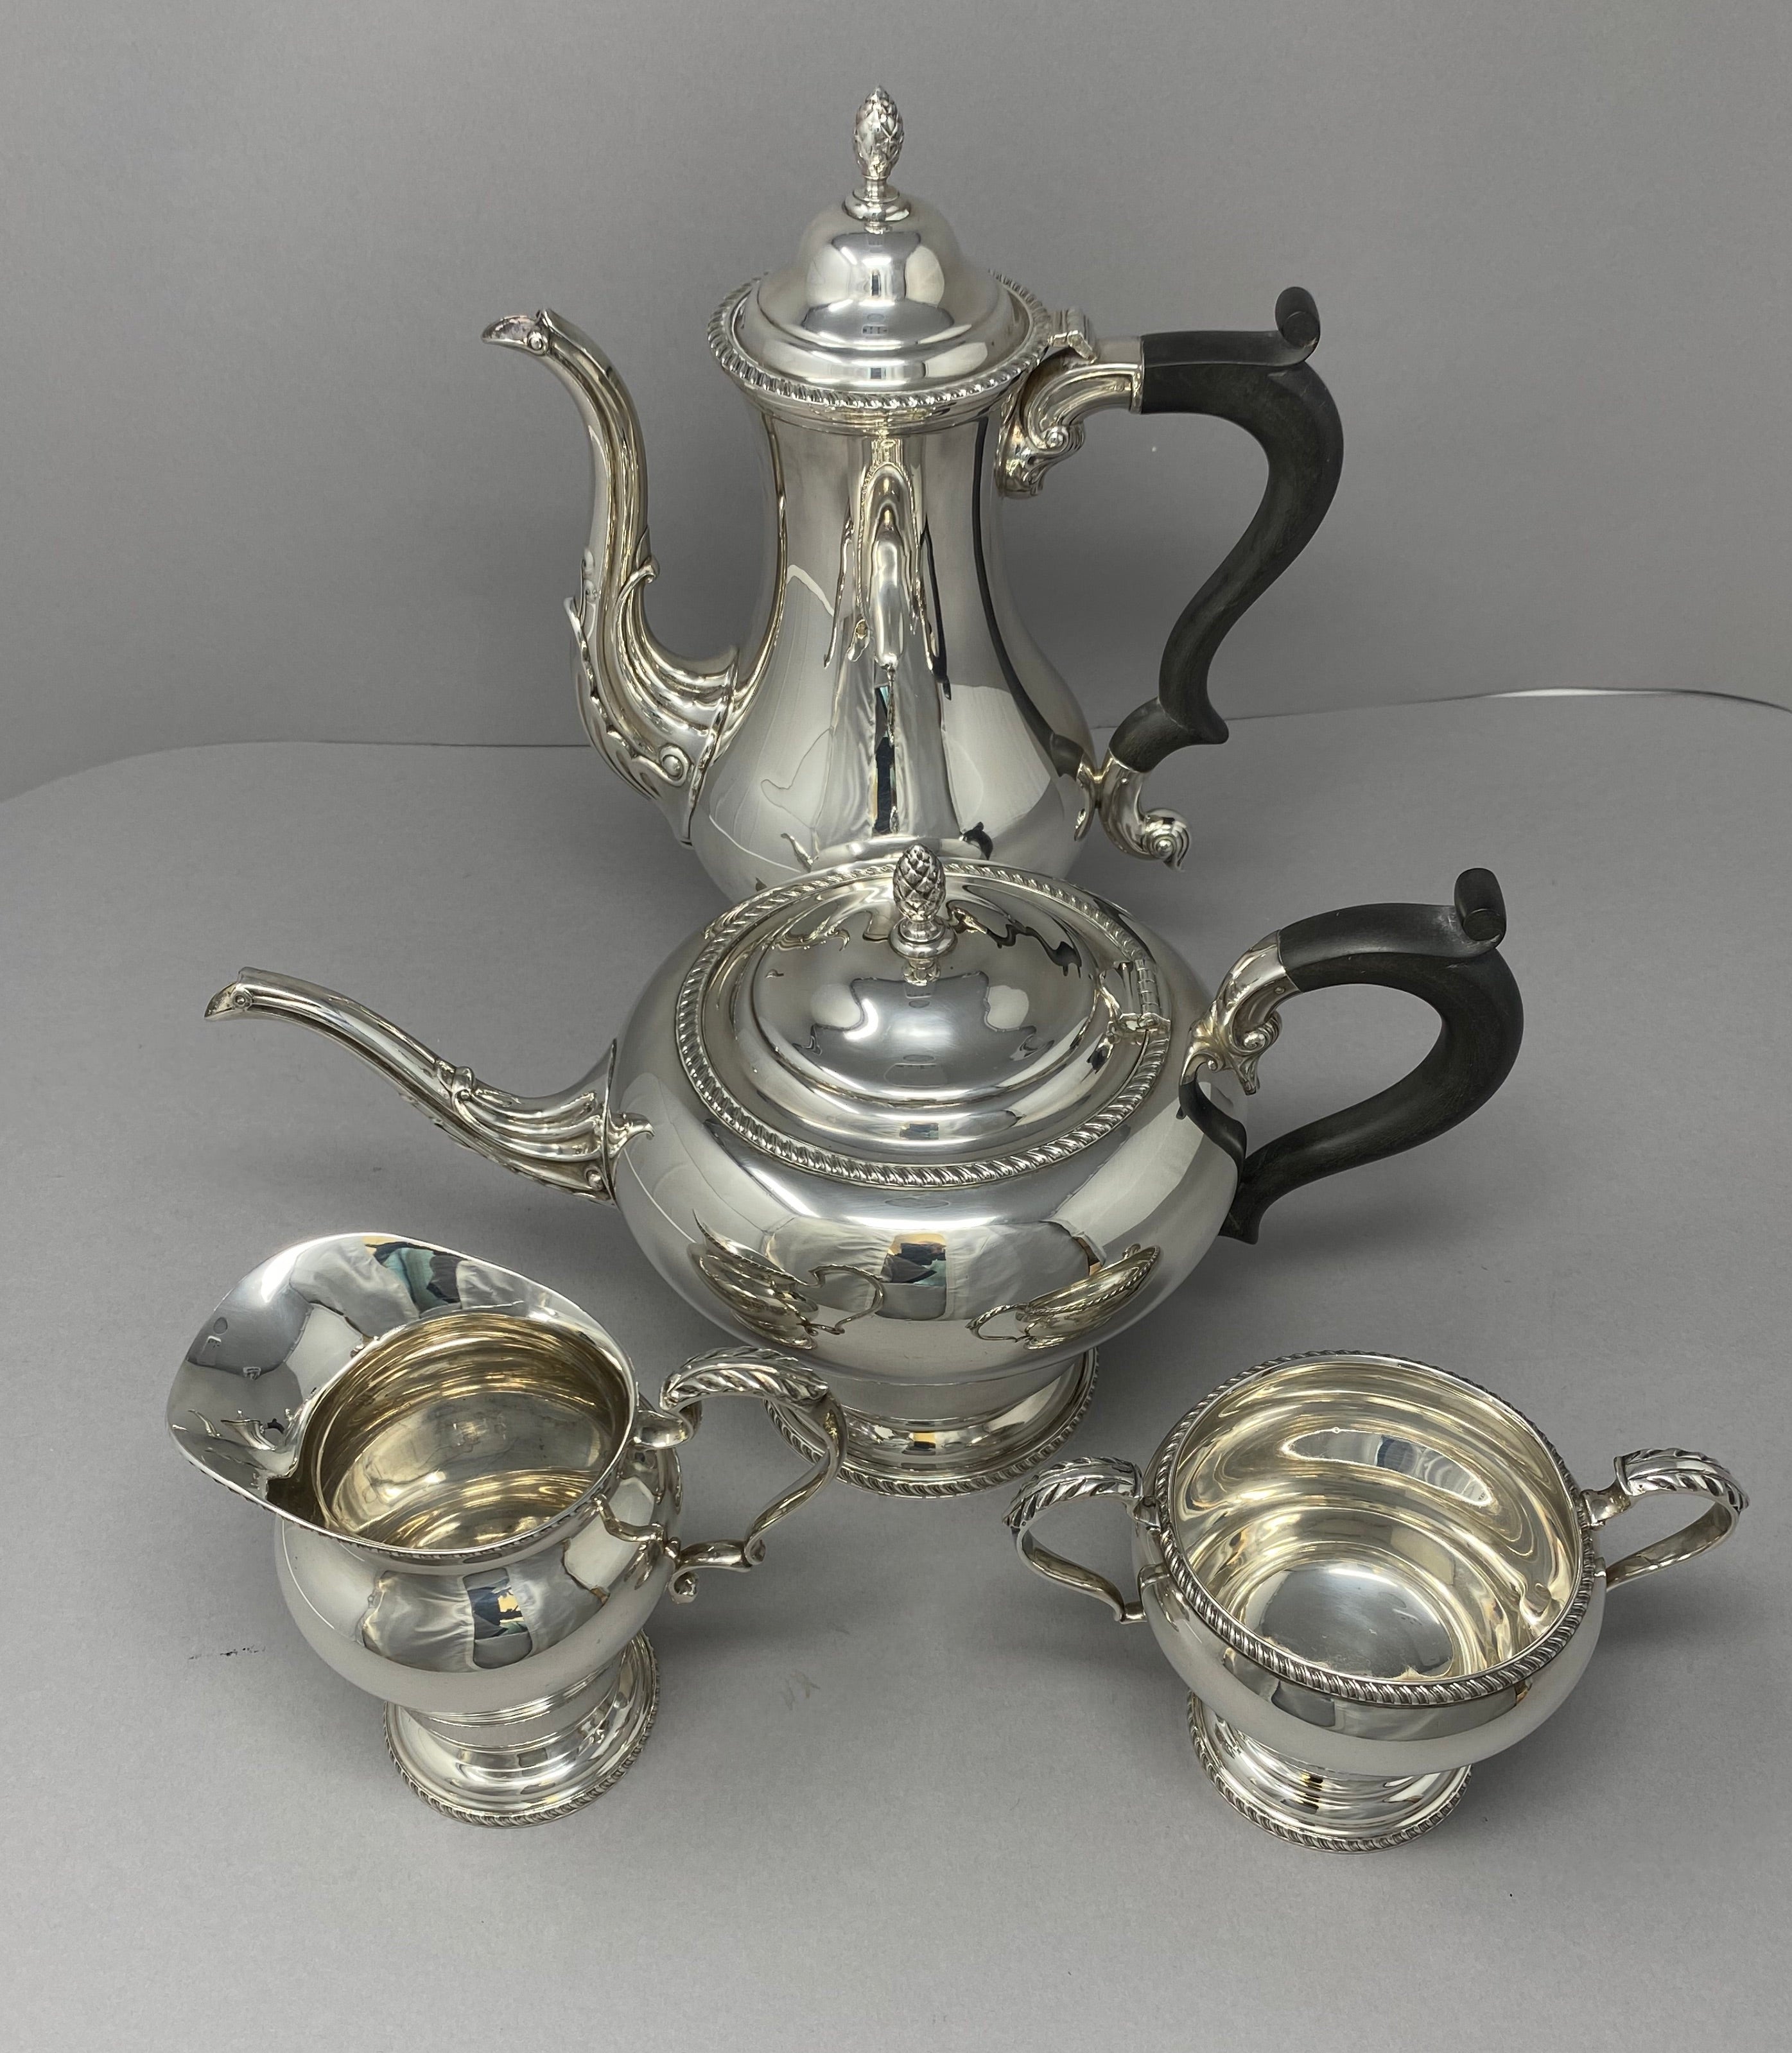 Silver Tea and Coffee Set - four pieces